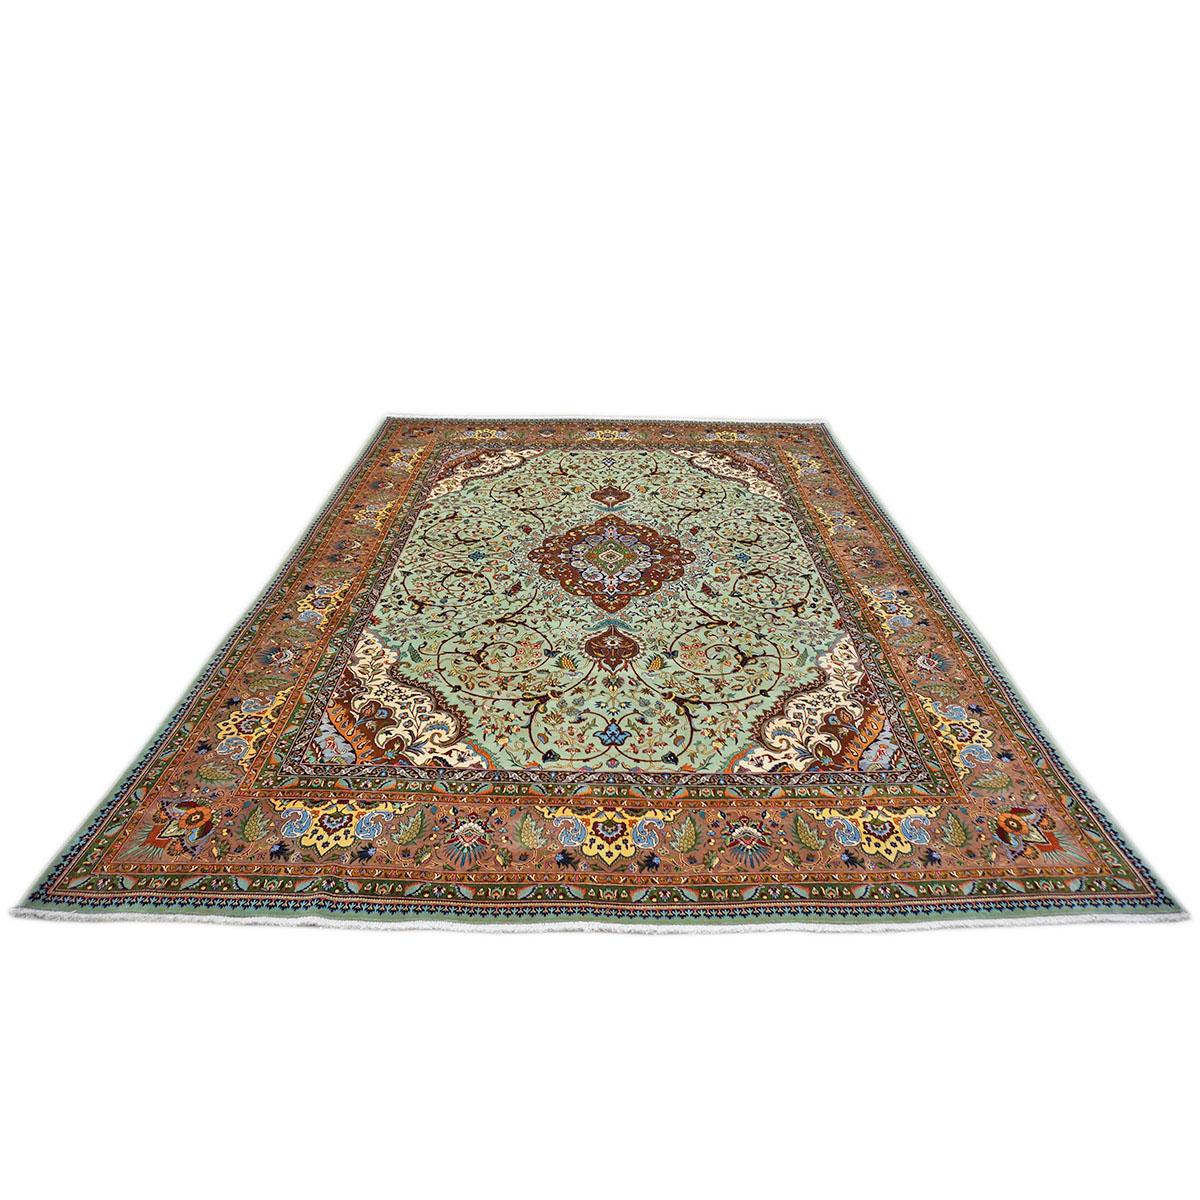 Antique 1930s Persian Tabriz 9x13 Light Green & Light Clay Handmade Area Rug In Good Condition For Sale In Houston, TX